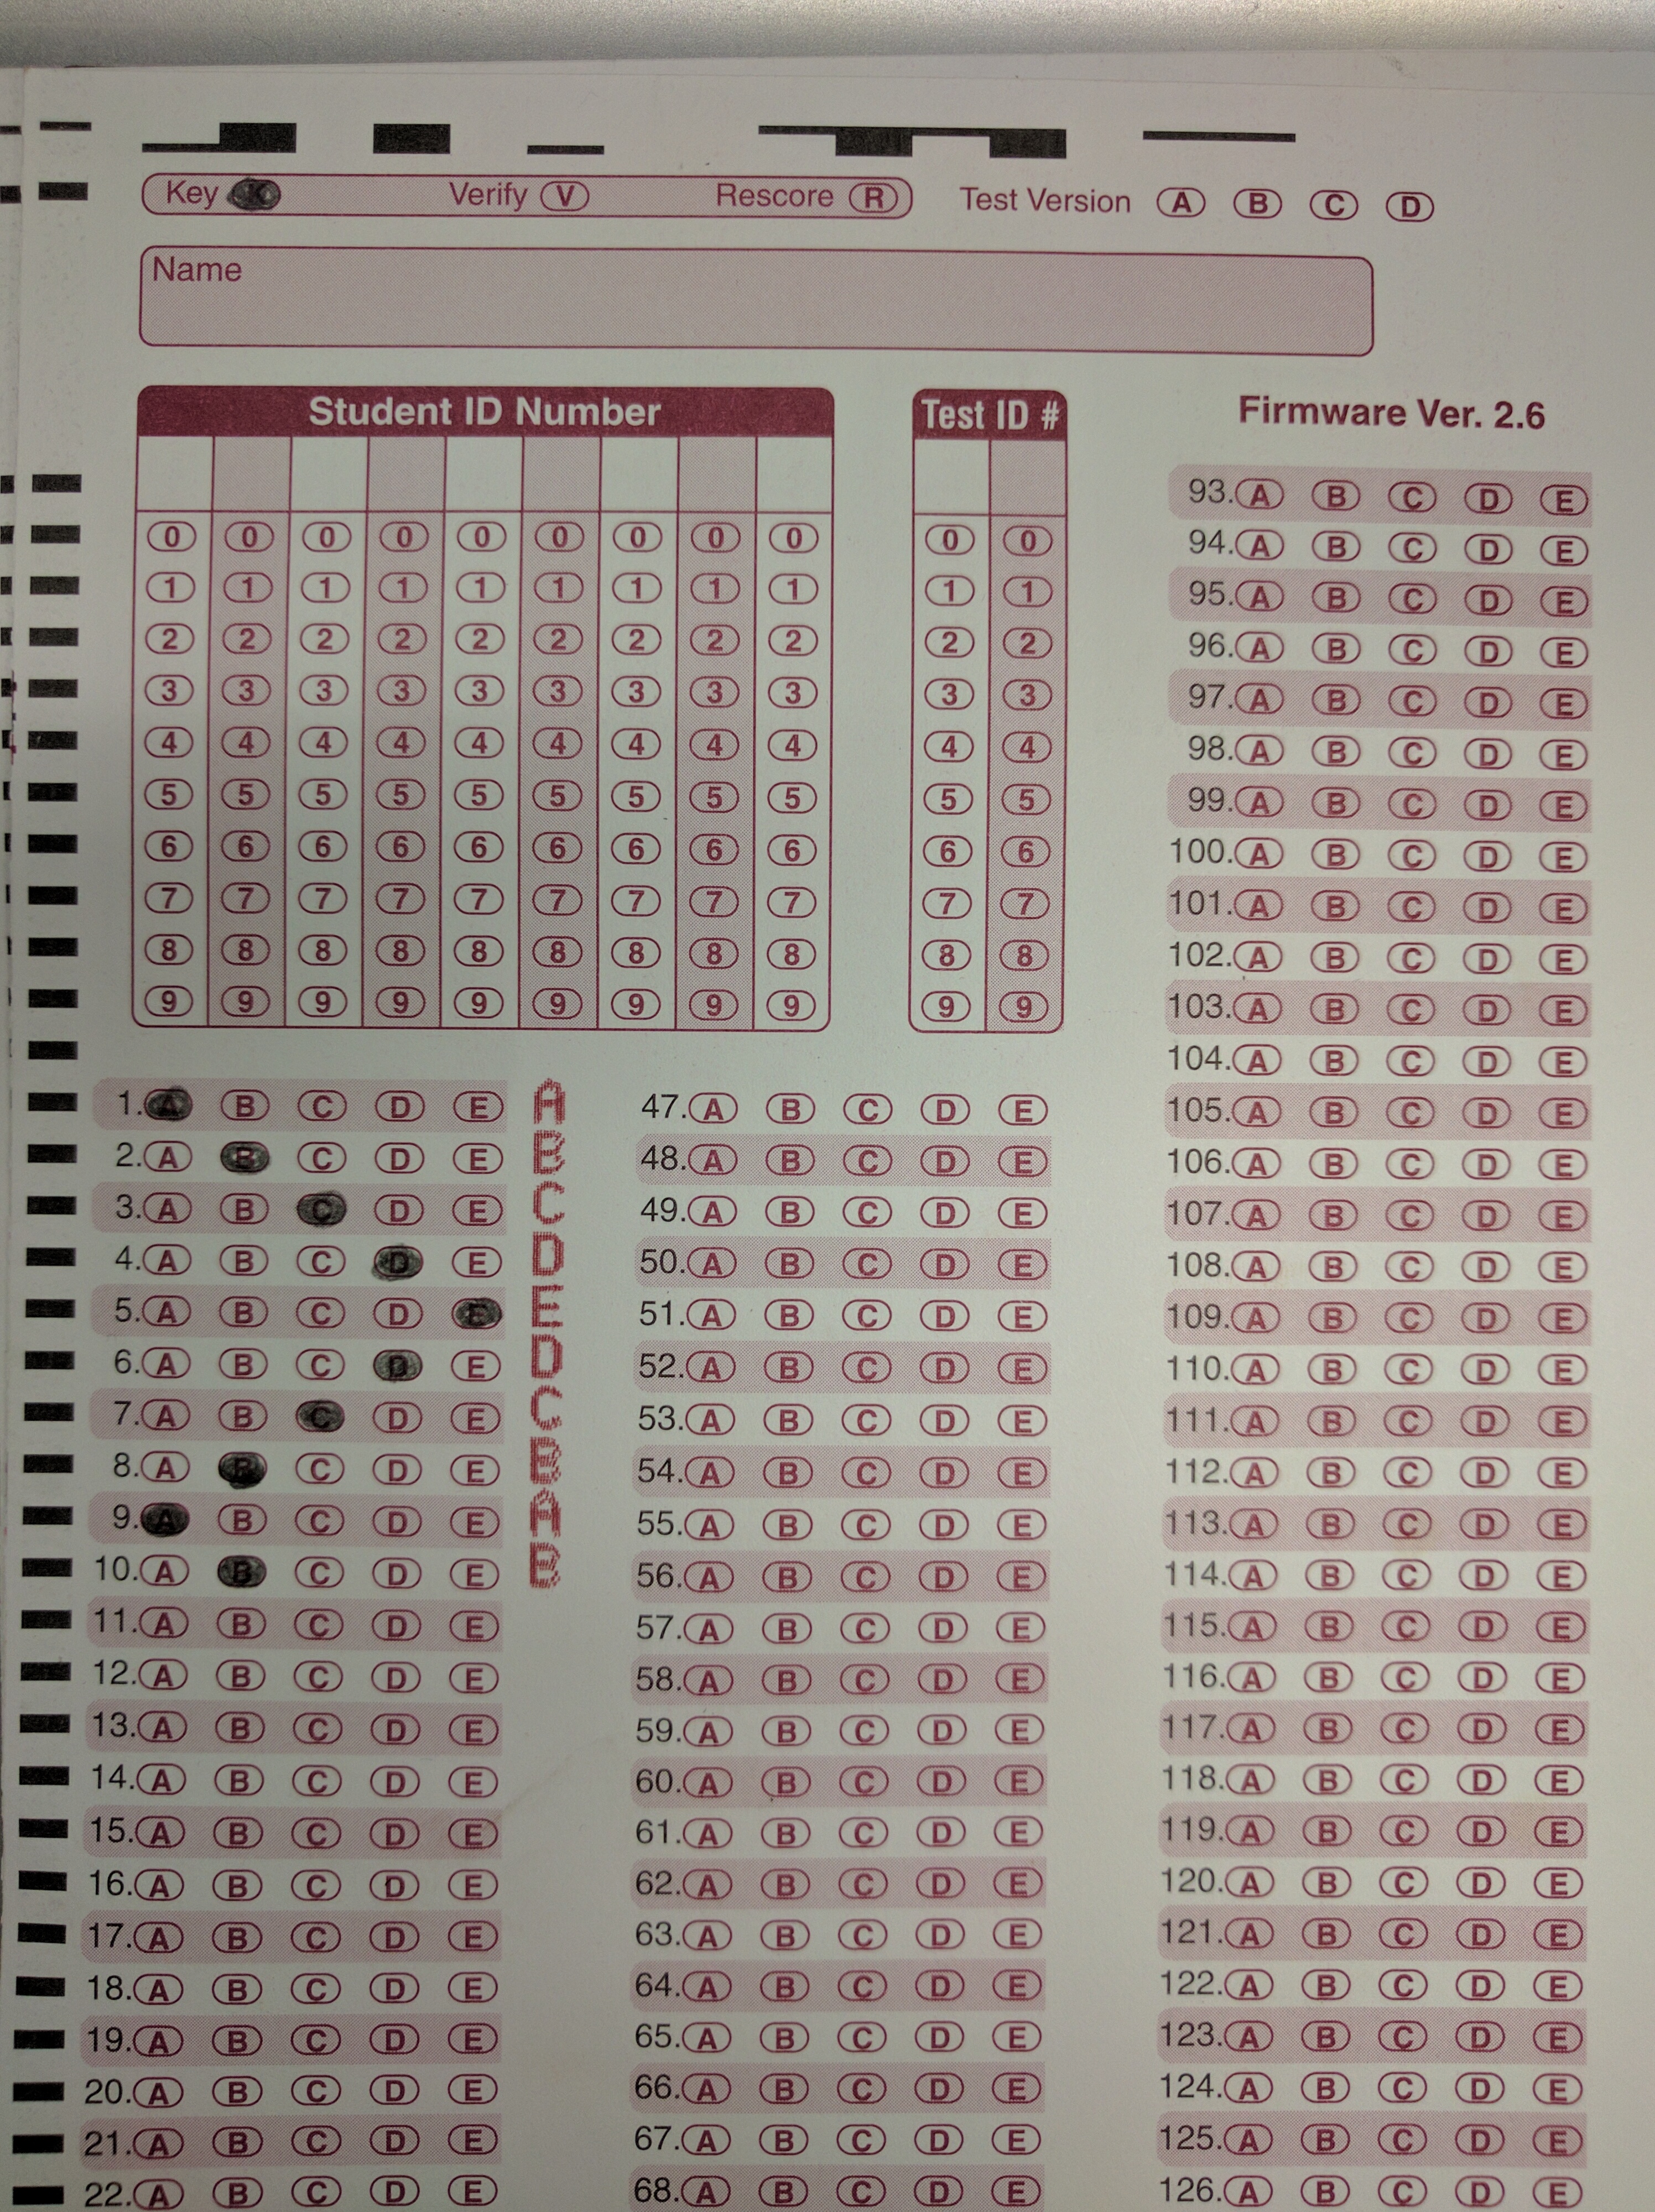 key answers printed next to each question